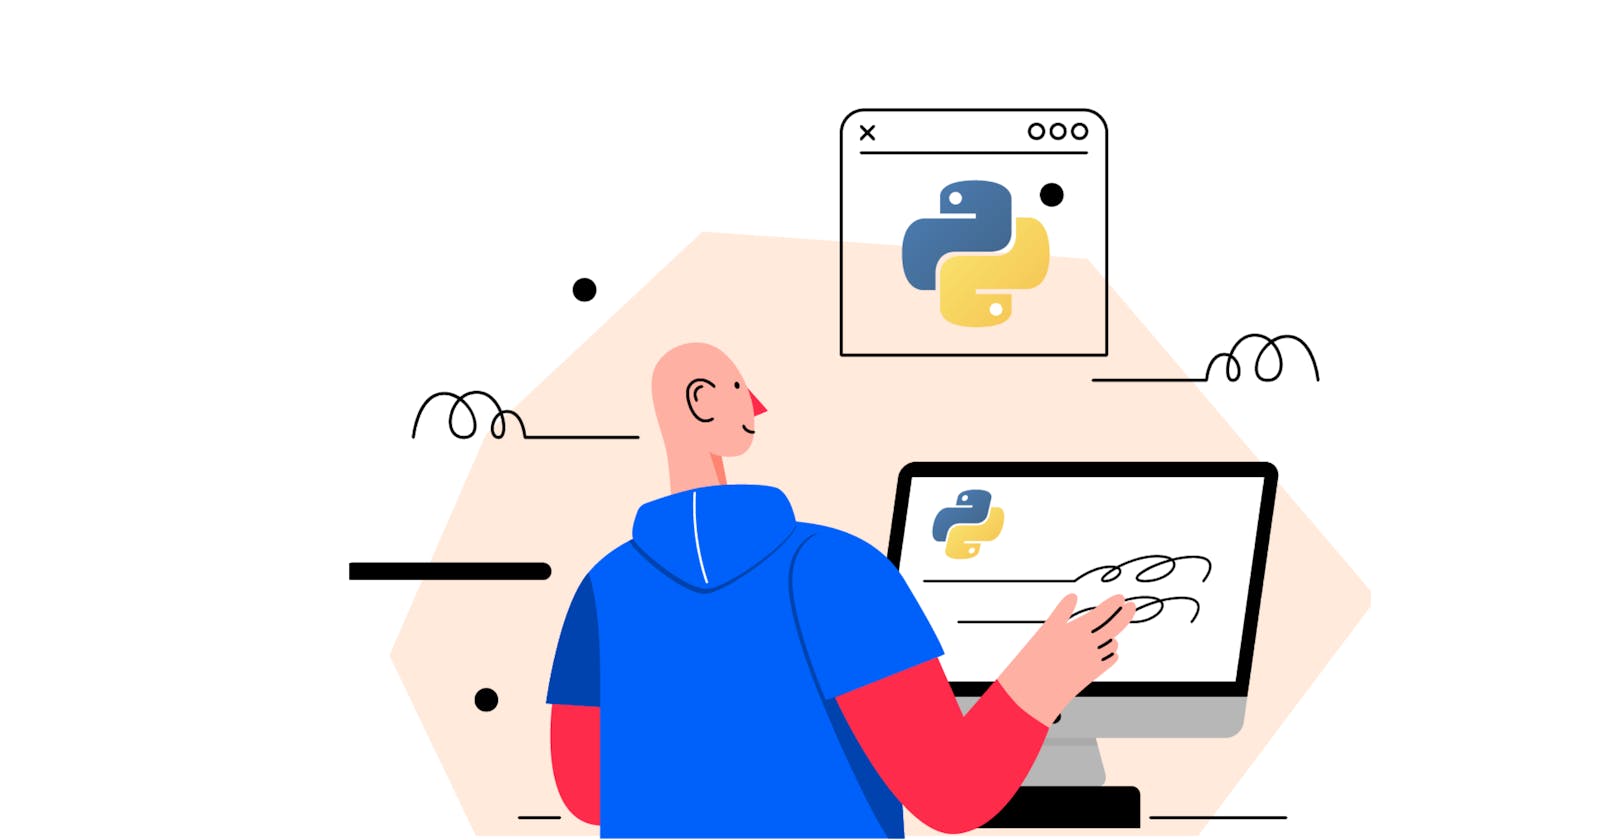 20 Best Free Python Code Editors - Guide To Getting Started with Python